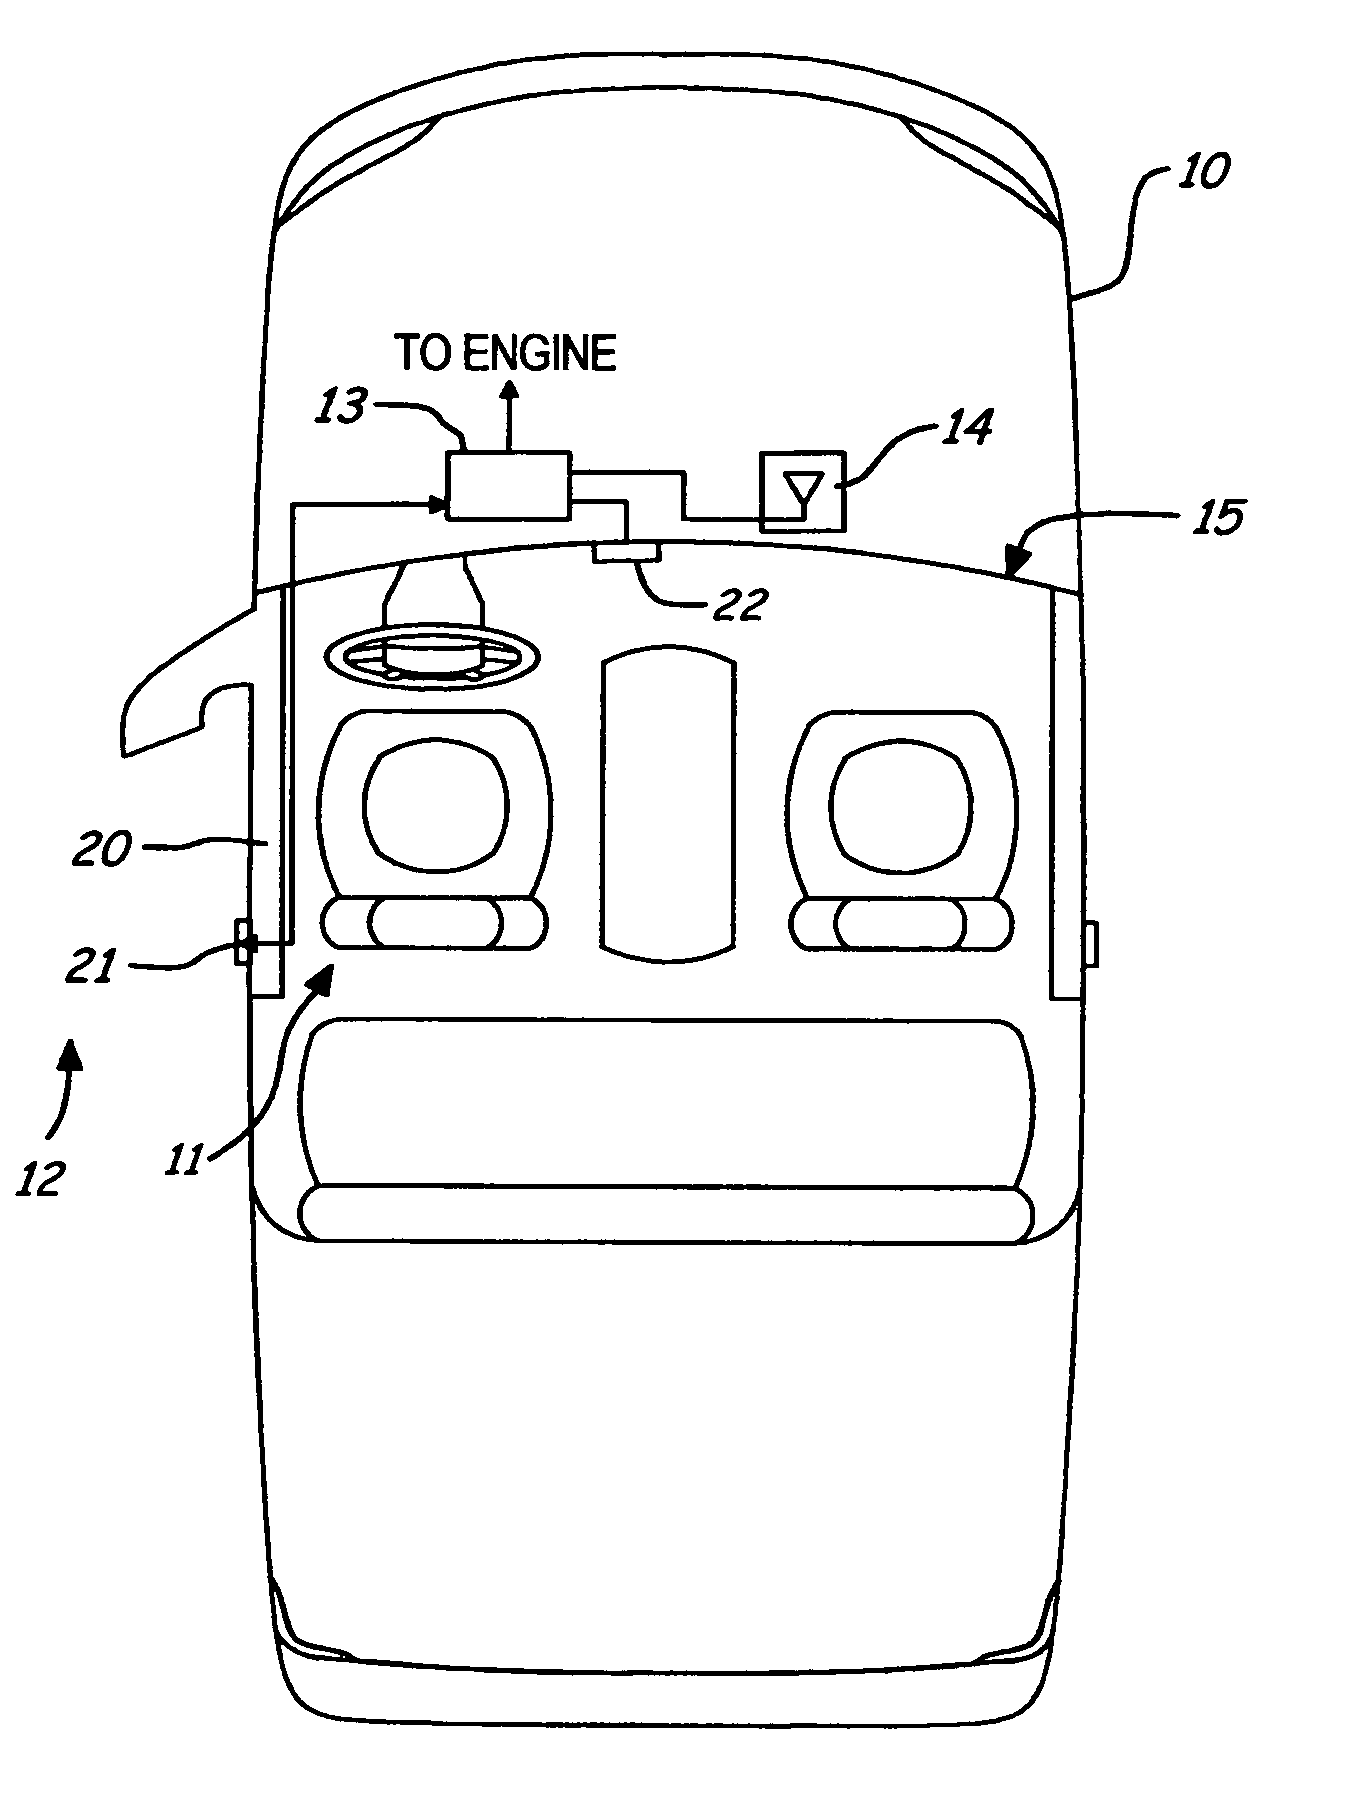 Integrated passive entry transmitter/receiver